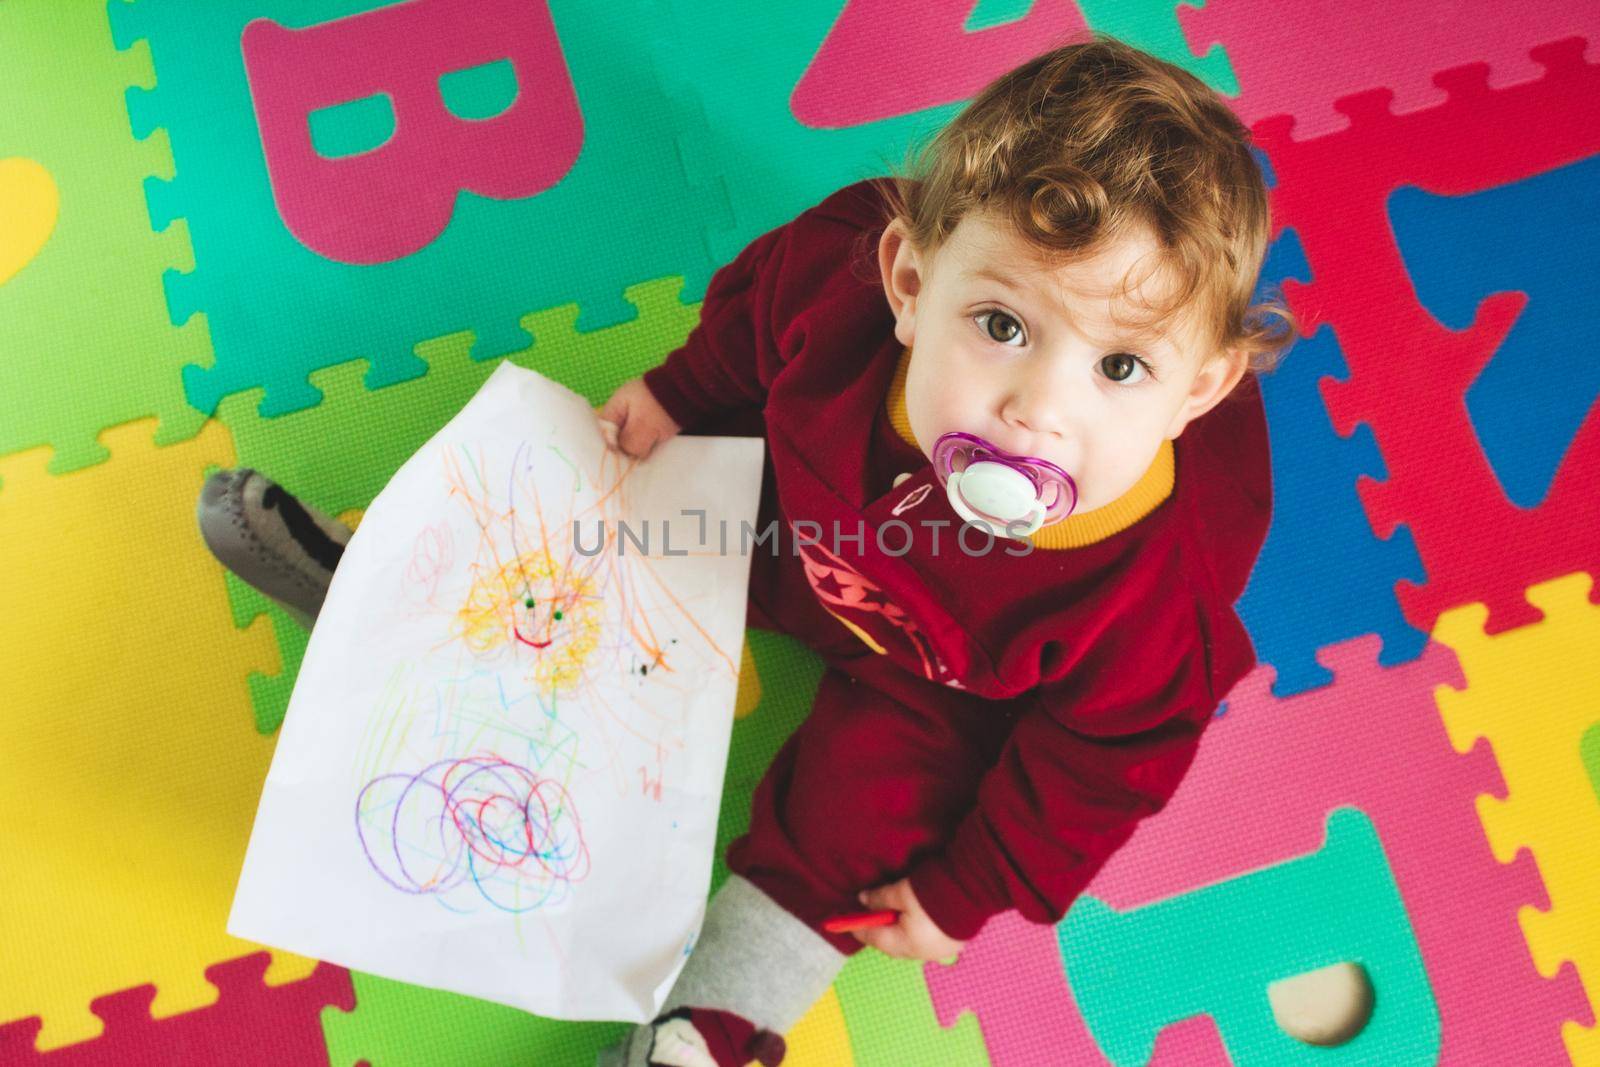 Cute baby girl with dummy on alphabet play mat drawing on paper with a colored crayon